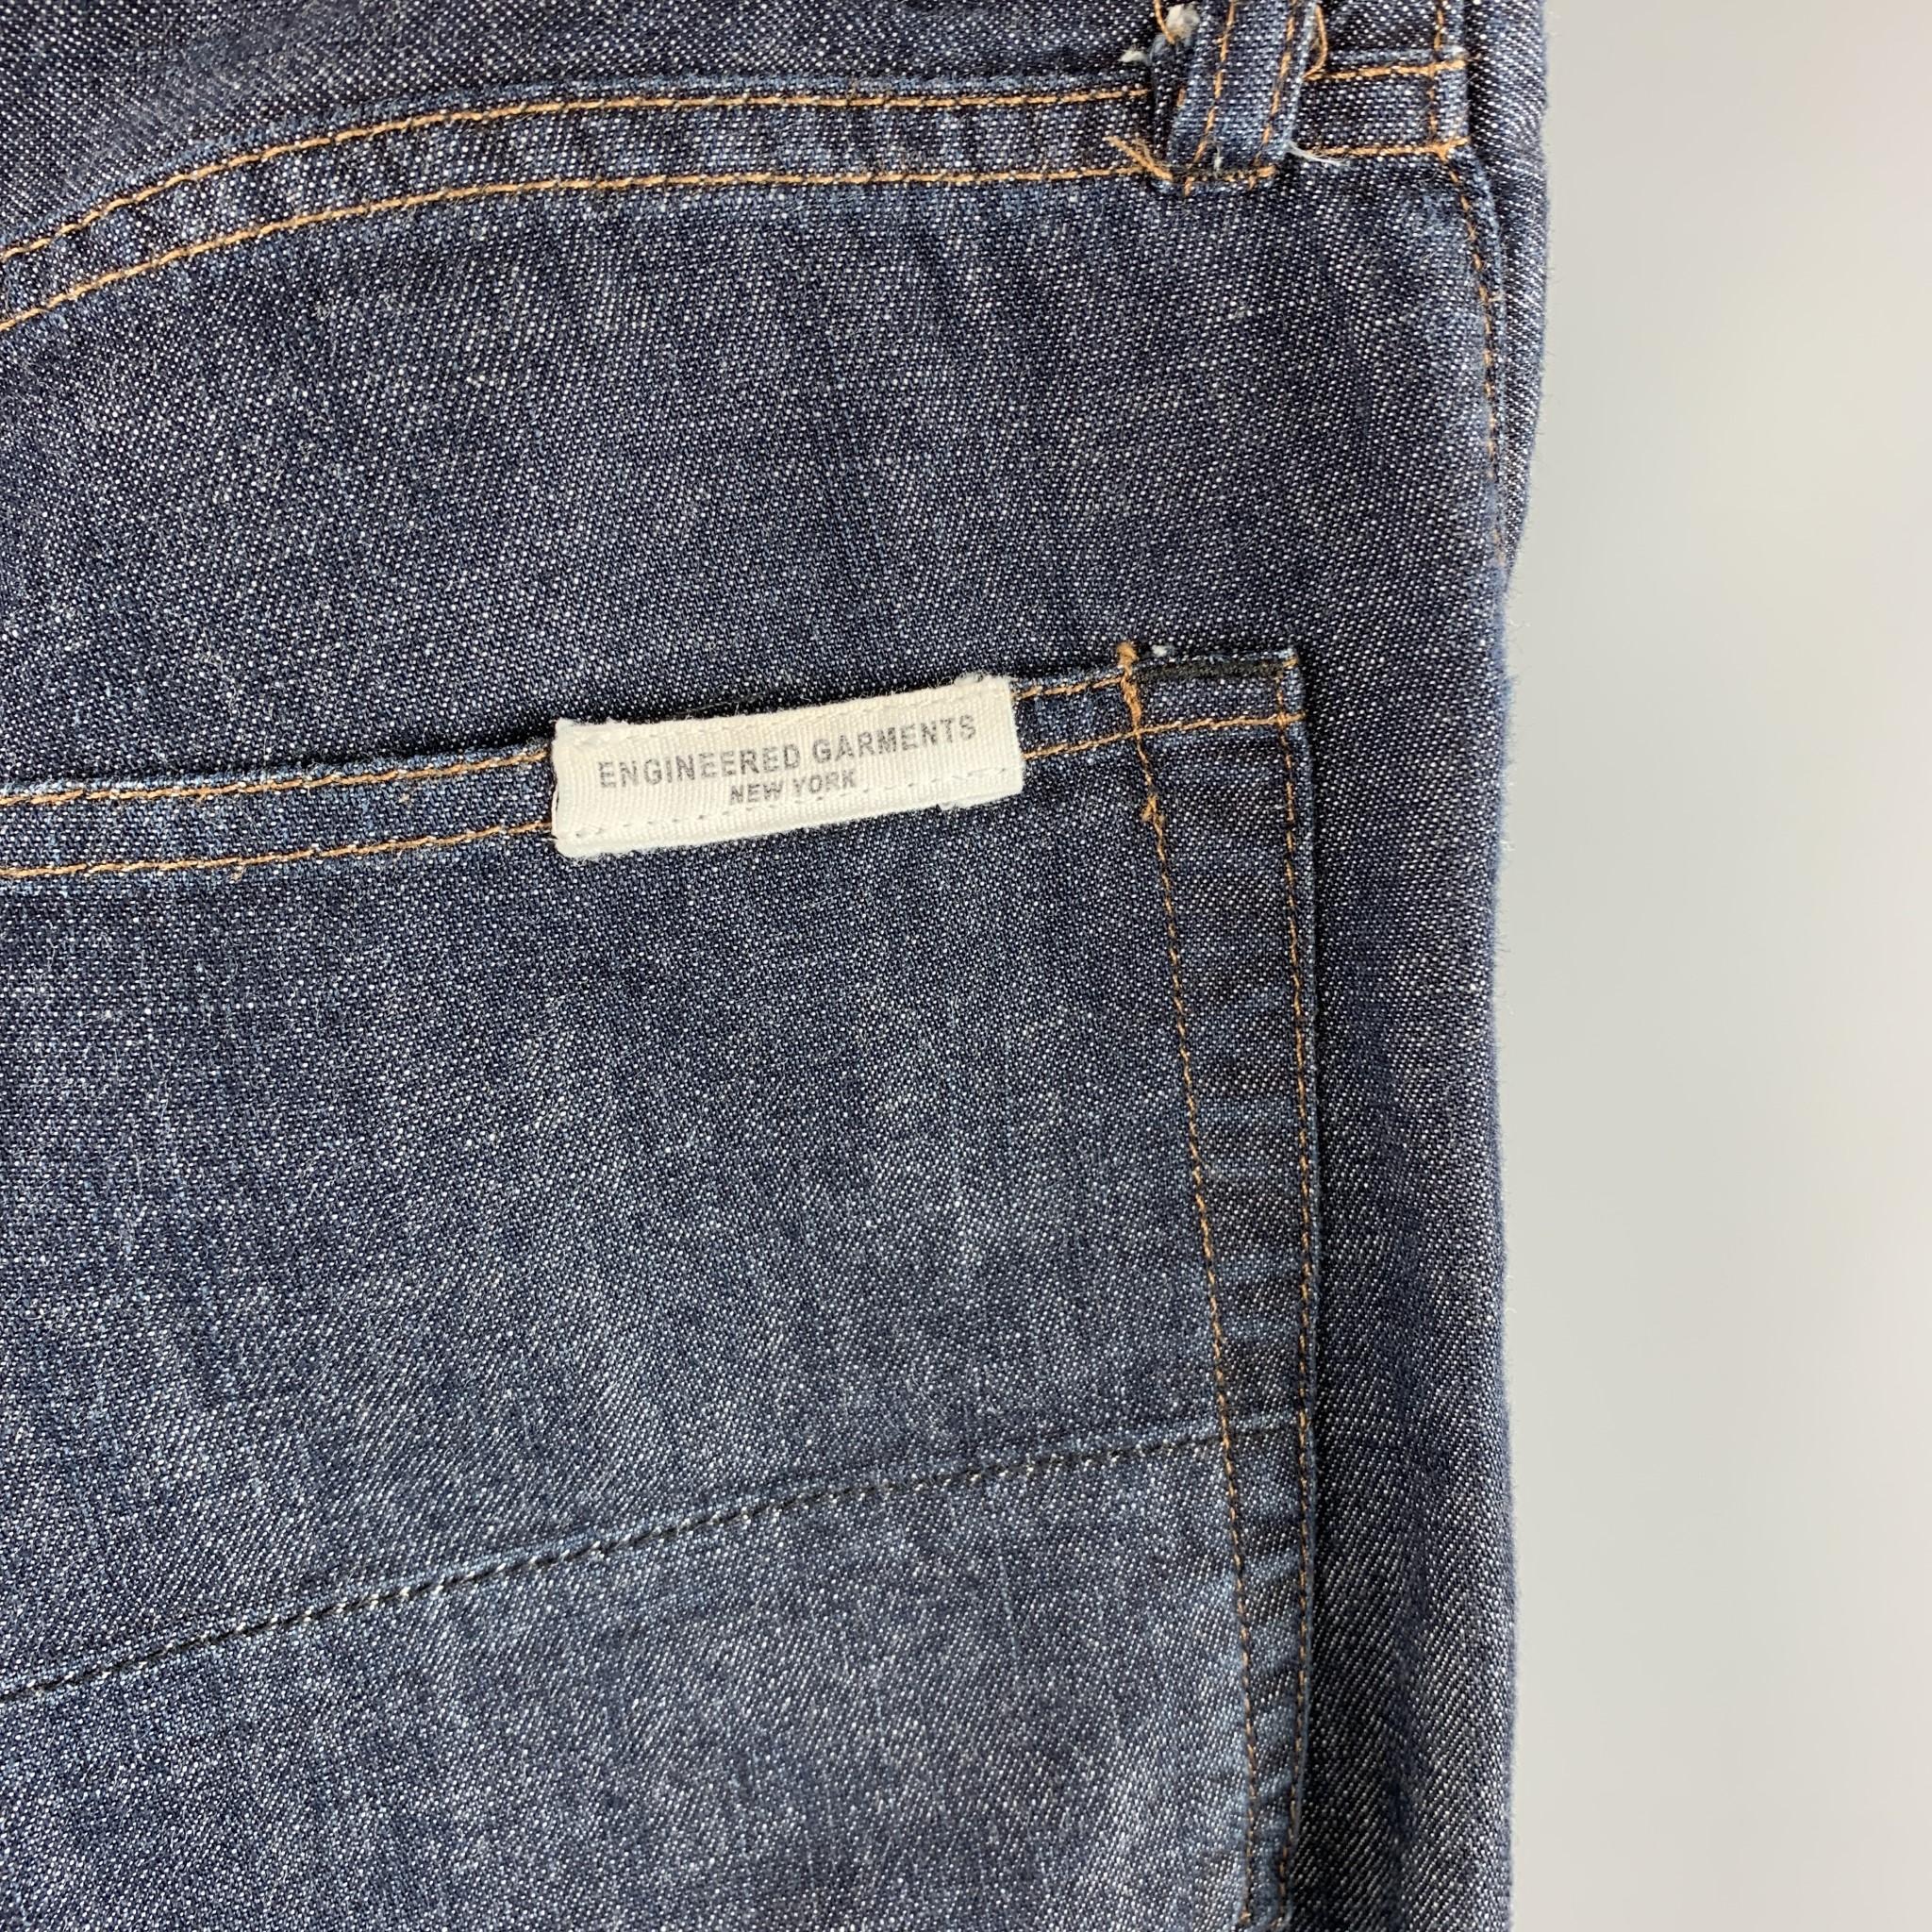 ENGINEERED GARMENTS Size 32 Indigo Contrast Stitch Cotton Zip Fly Jeans In Good Condition In San Francisco, CA